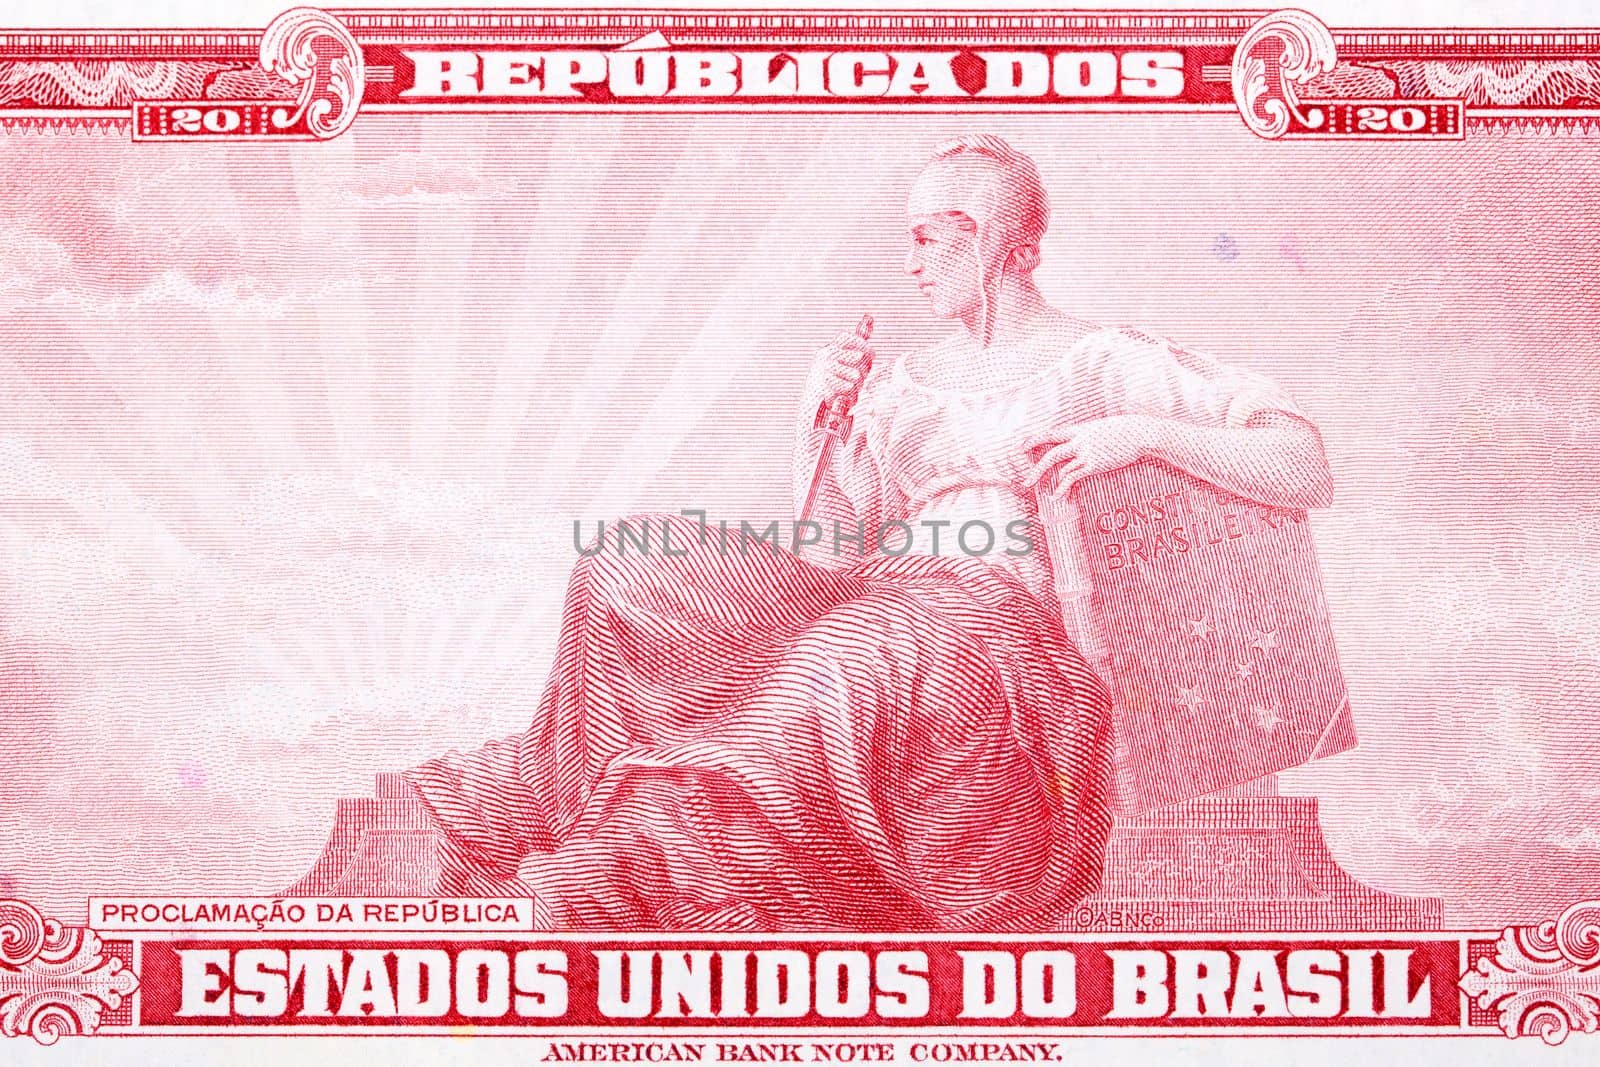 Allegory of the Republic from old Brazilian money by johan10